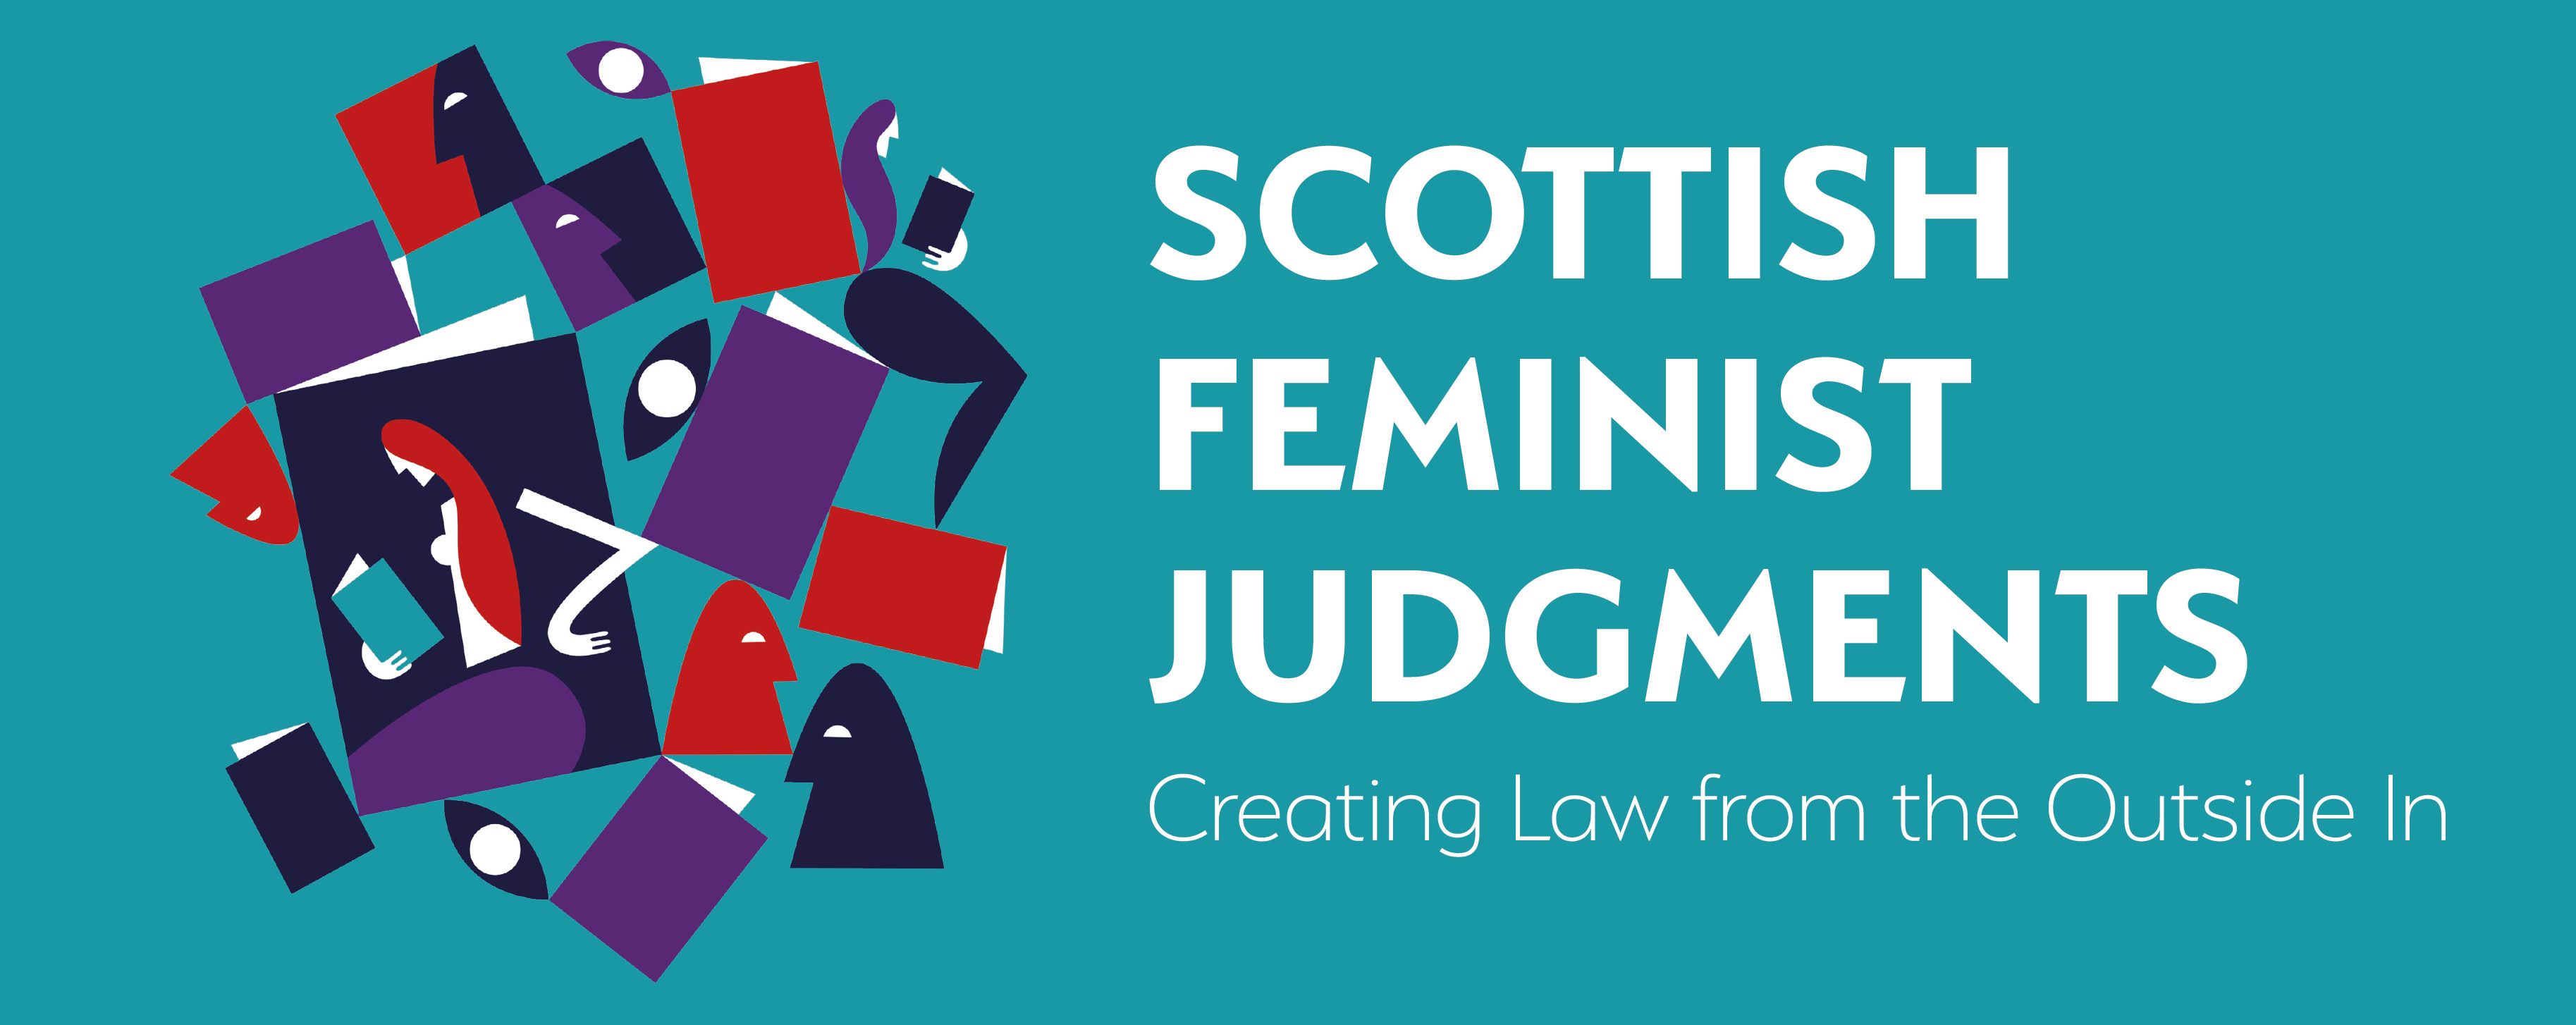 Scottish Feminist Judgments Project releases third episode in podcast series